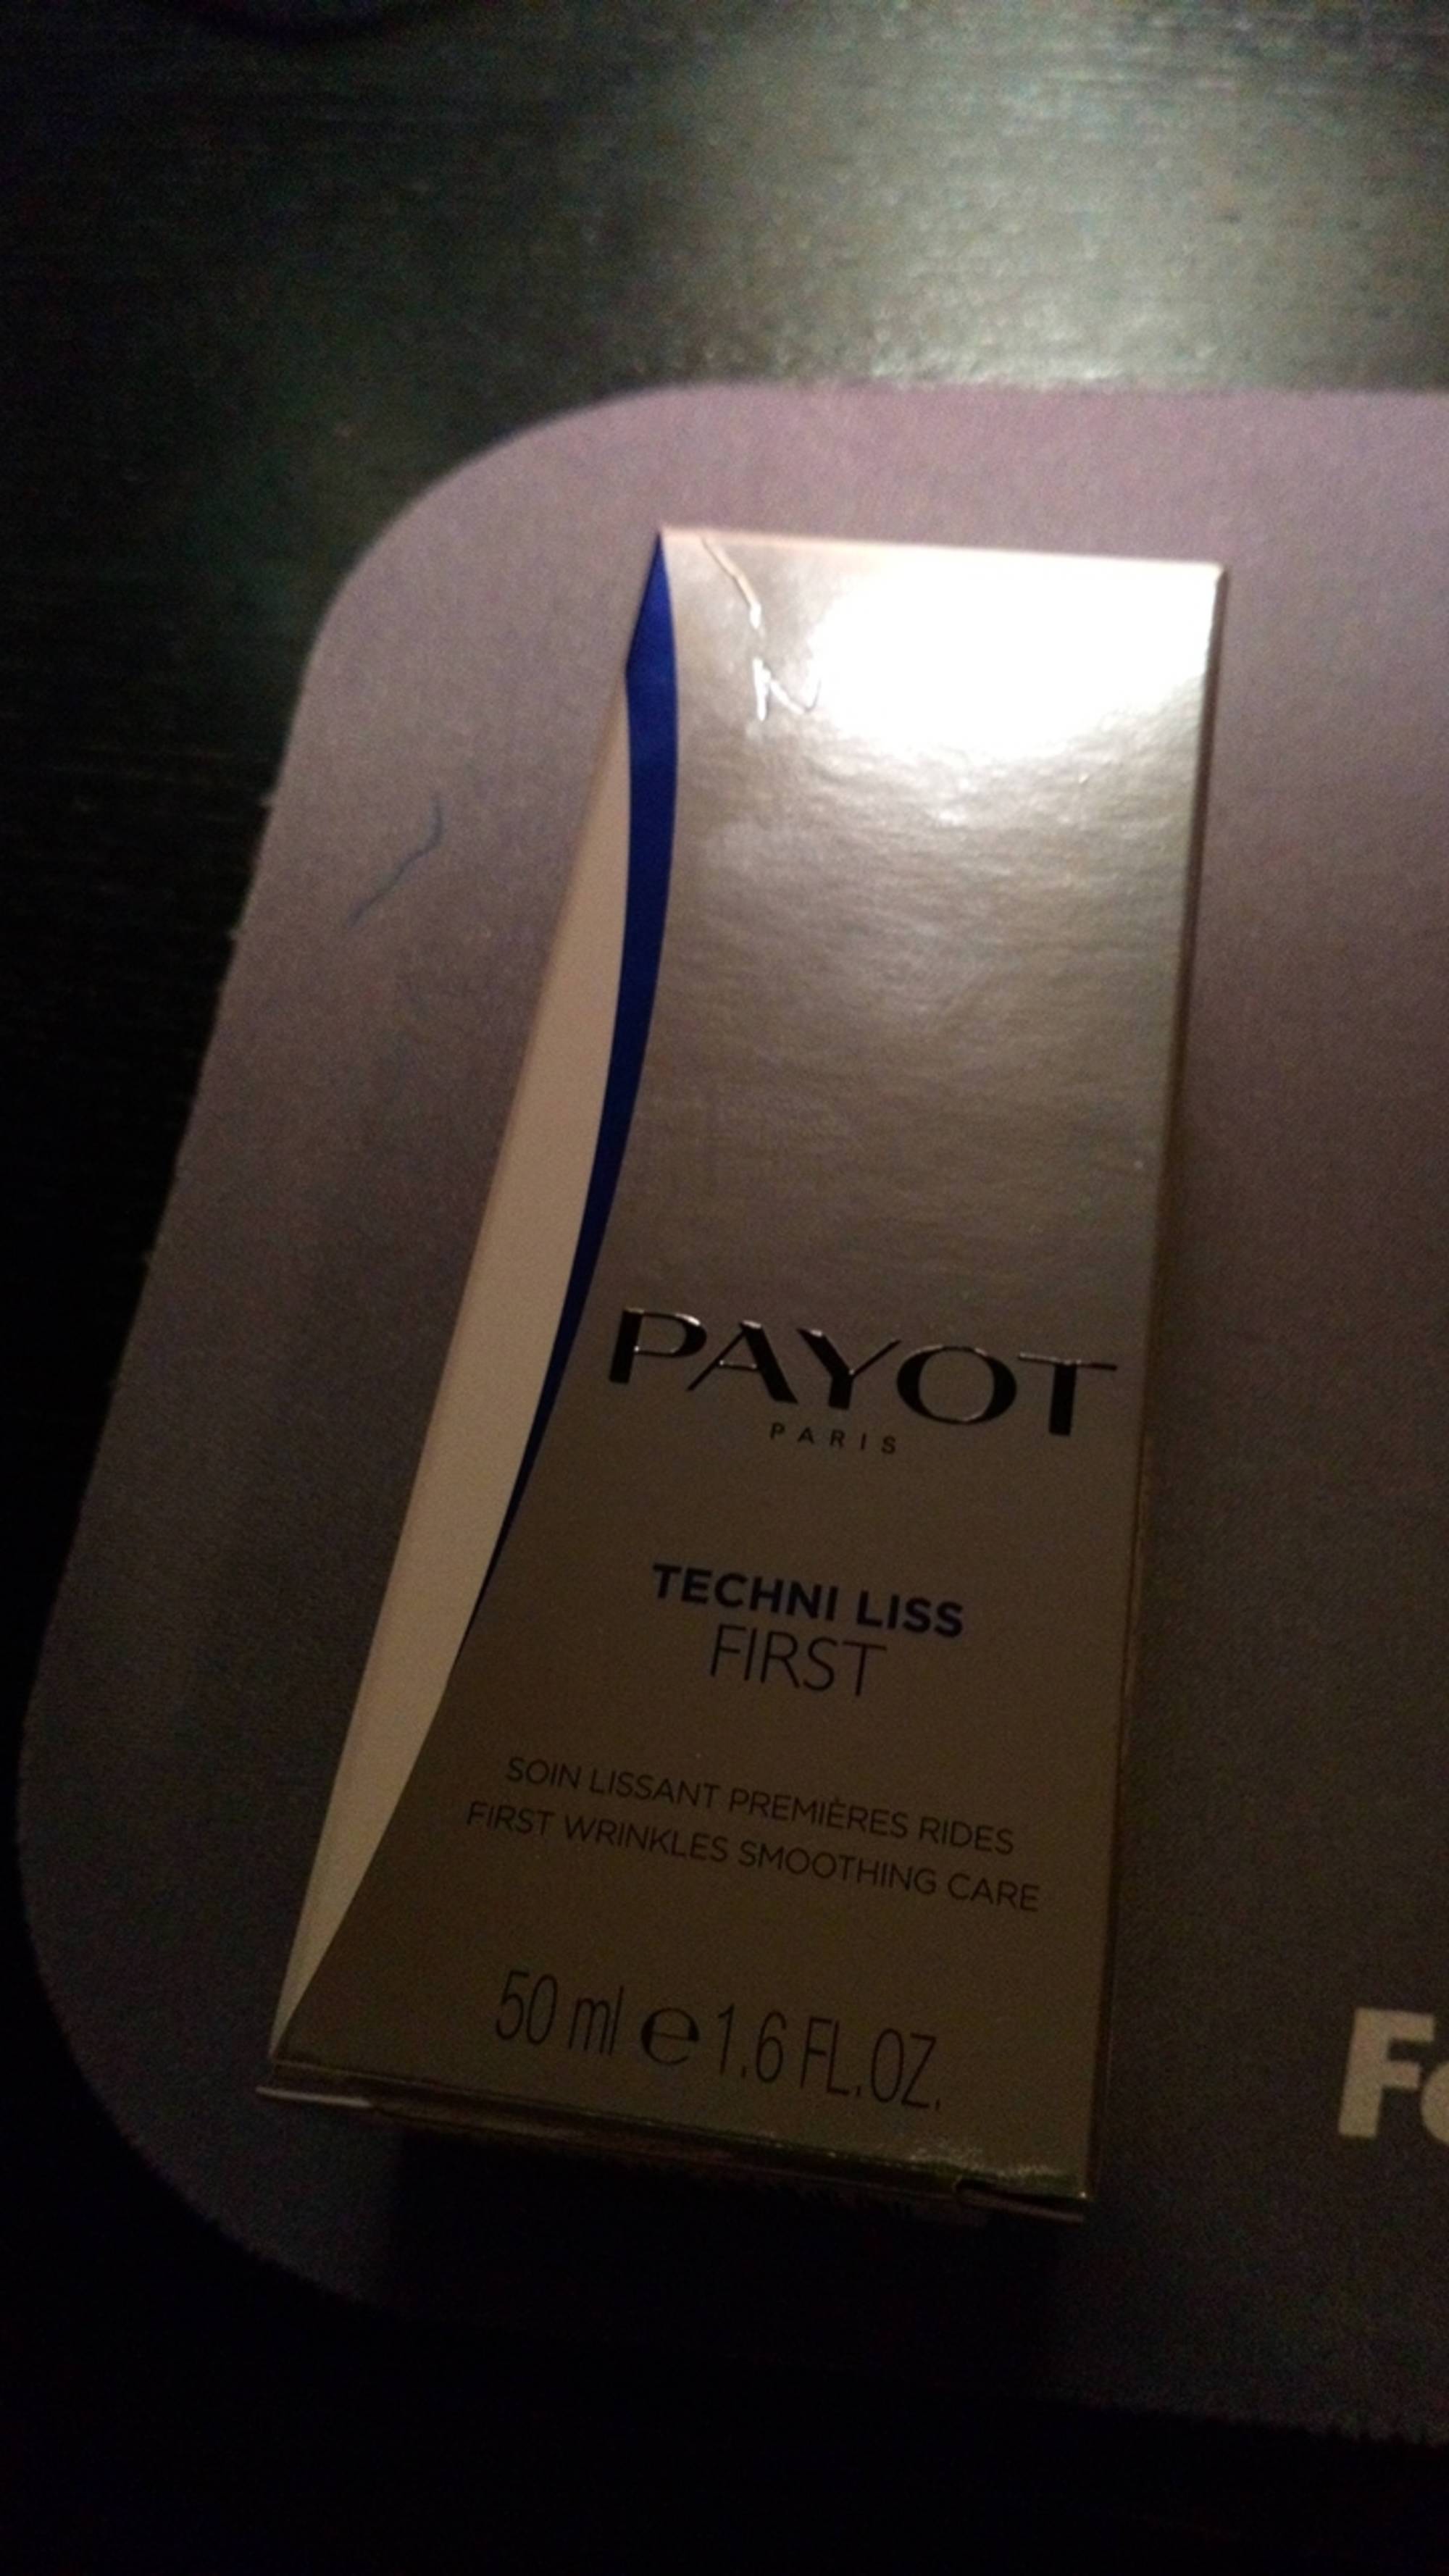 PAYOT - Techni liss first - Soin lissant premières rides